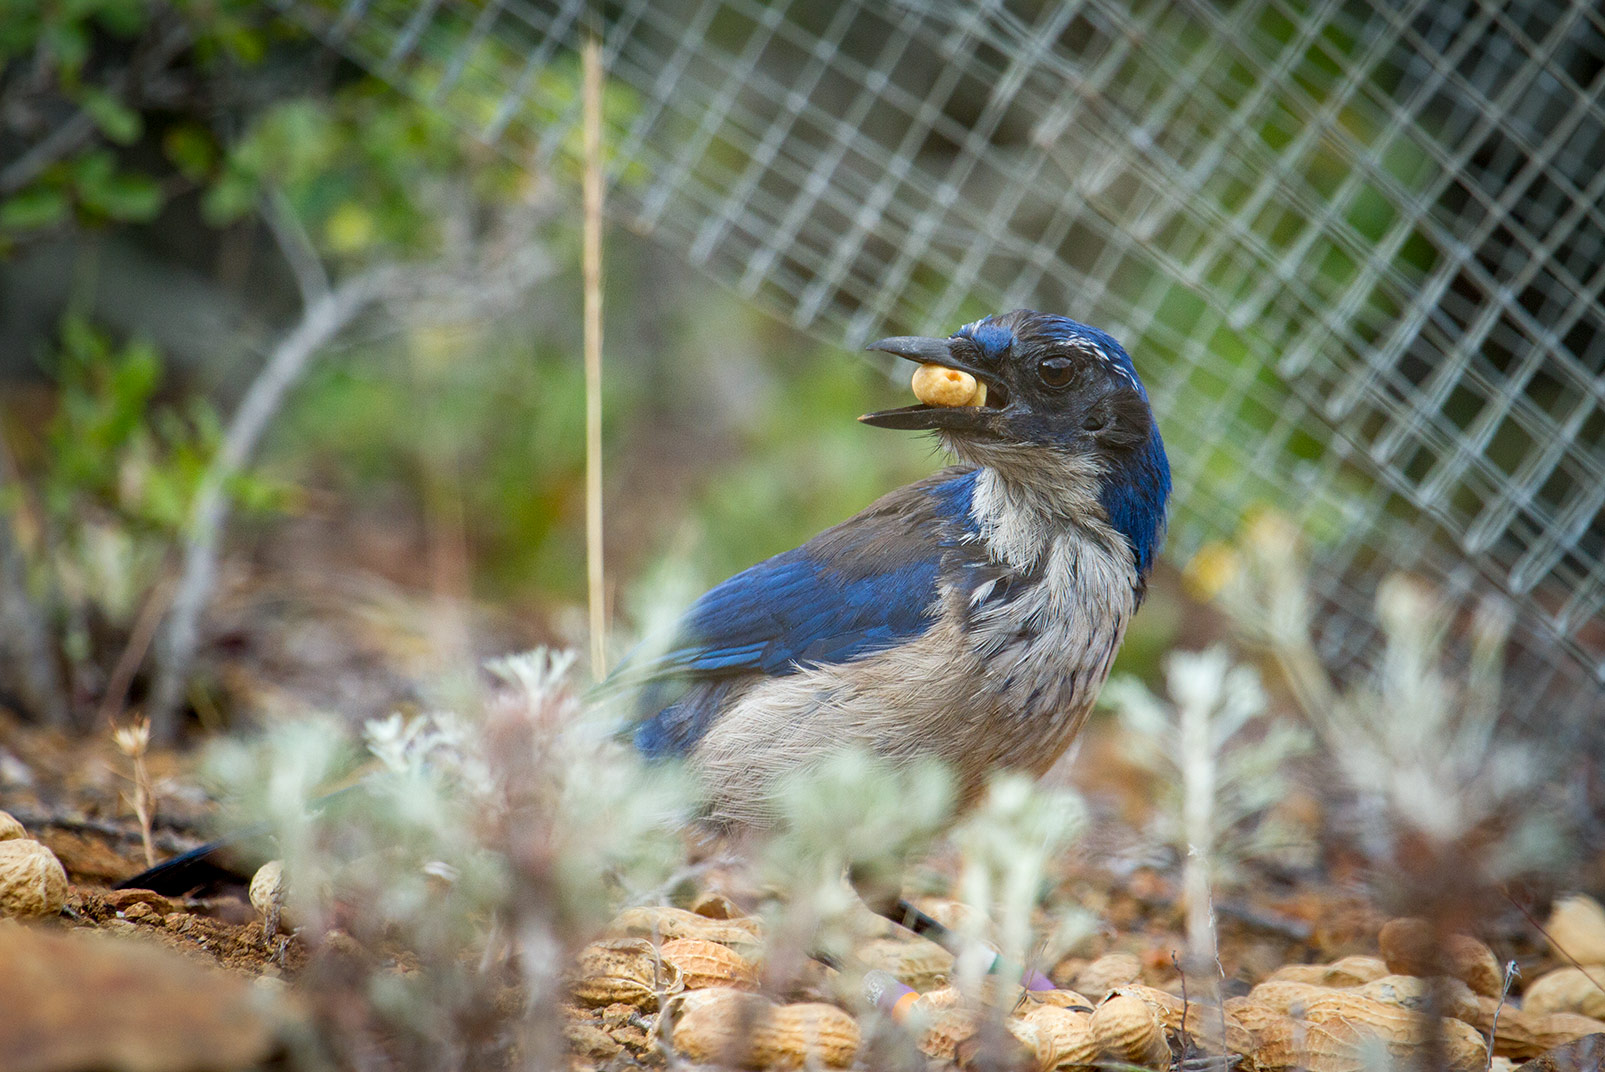 Heim joined researchers in luring scrub-jays to box traps with peanuts. “You throw a peanut or a pine cone or a rock,” Heim says. “The birds will hear that and they’ll fly in.” The wire boxes are propped up with a stick tied to a string, that someone nearby can pull to close the box. Photo © Morgan Heim